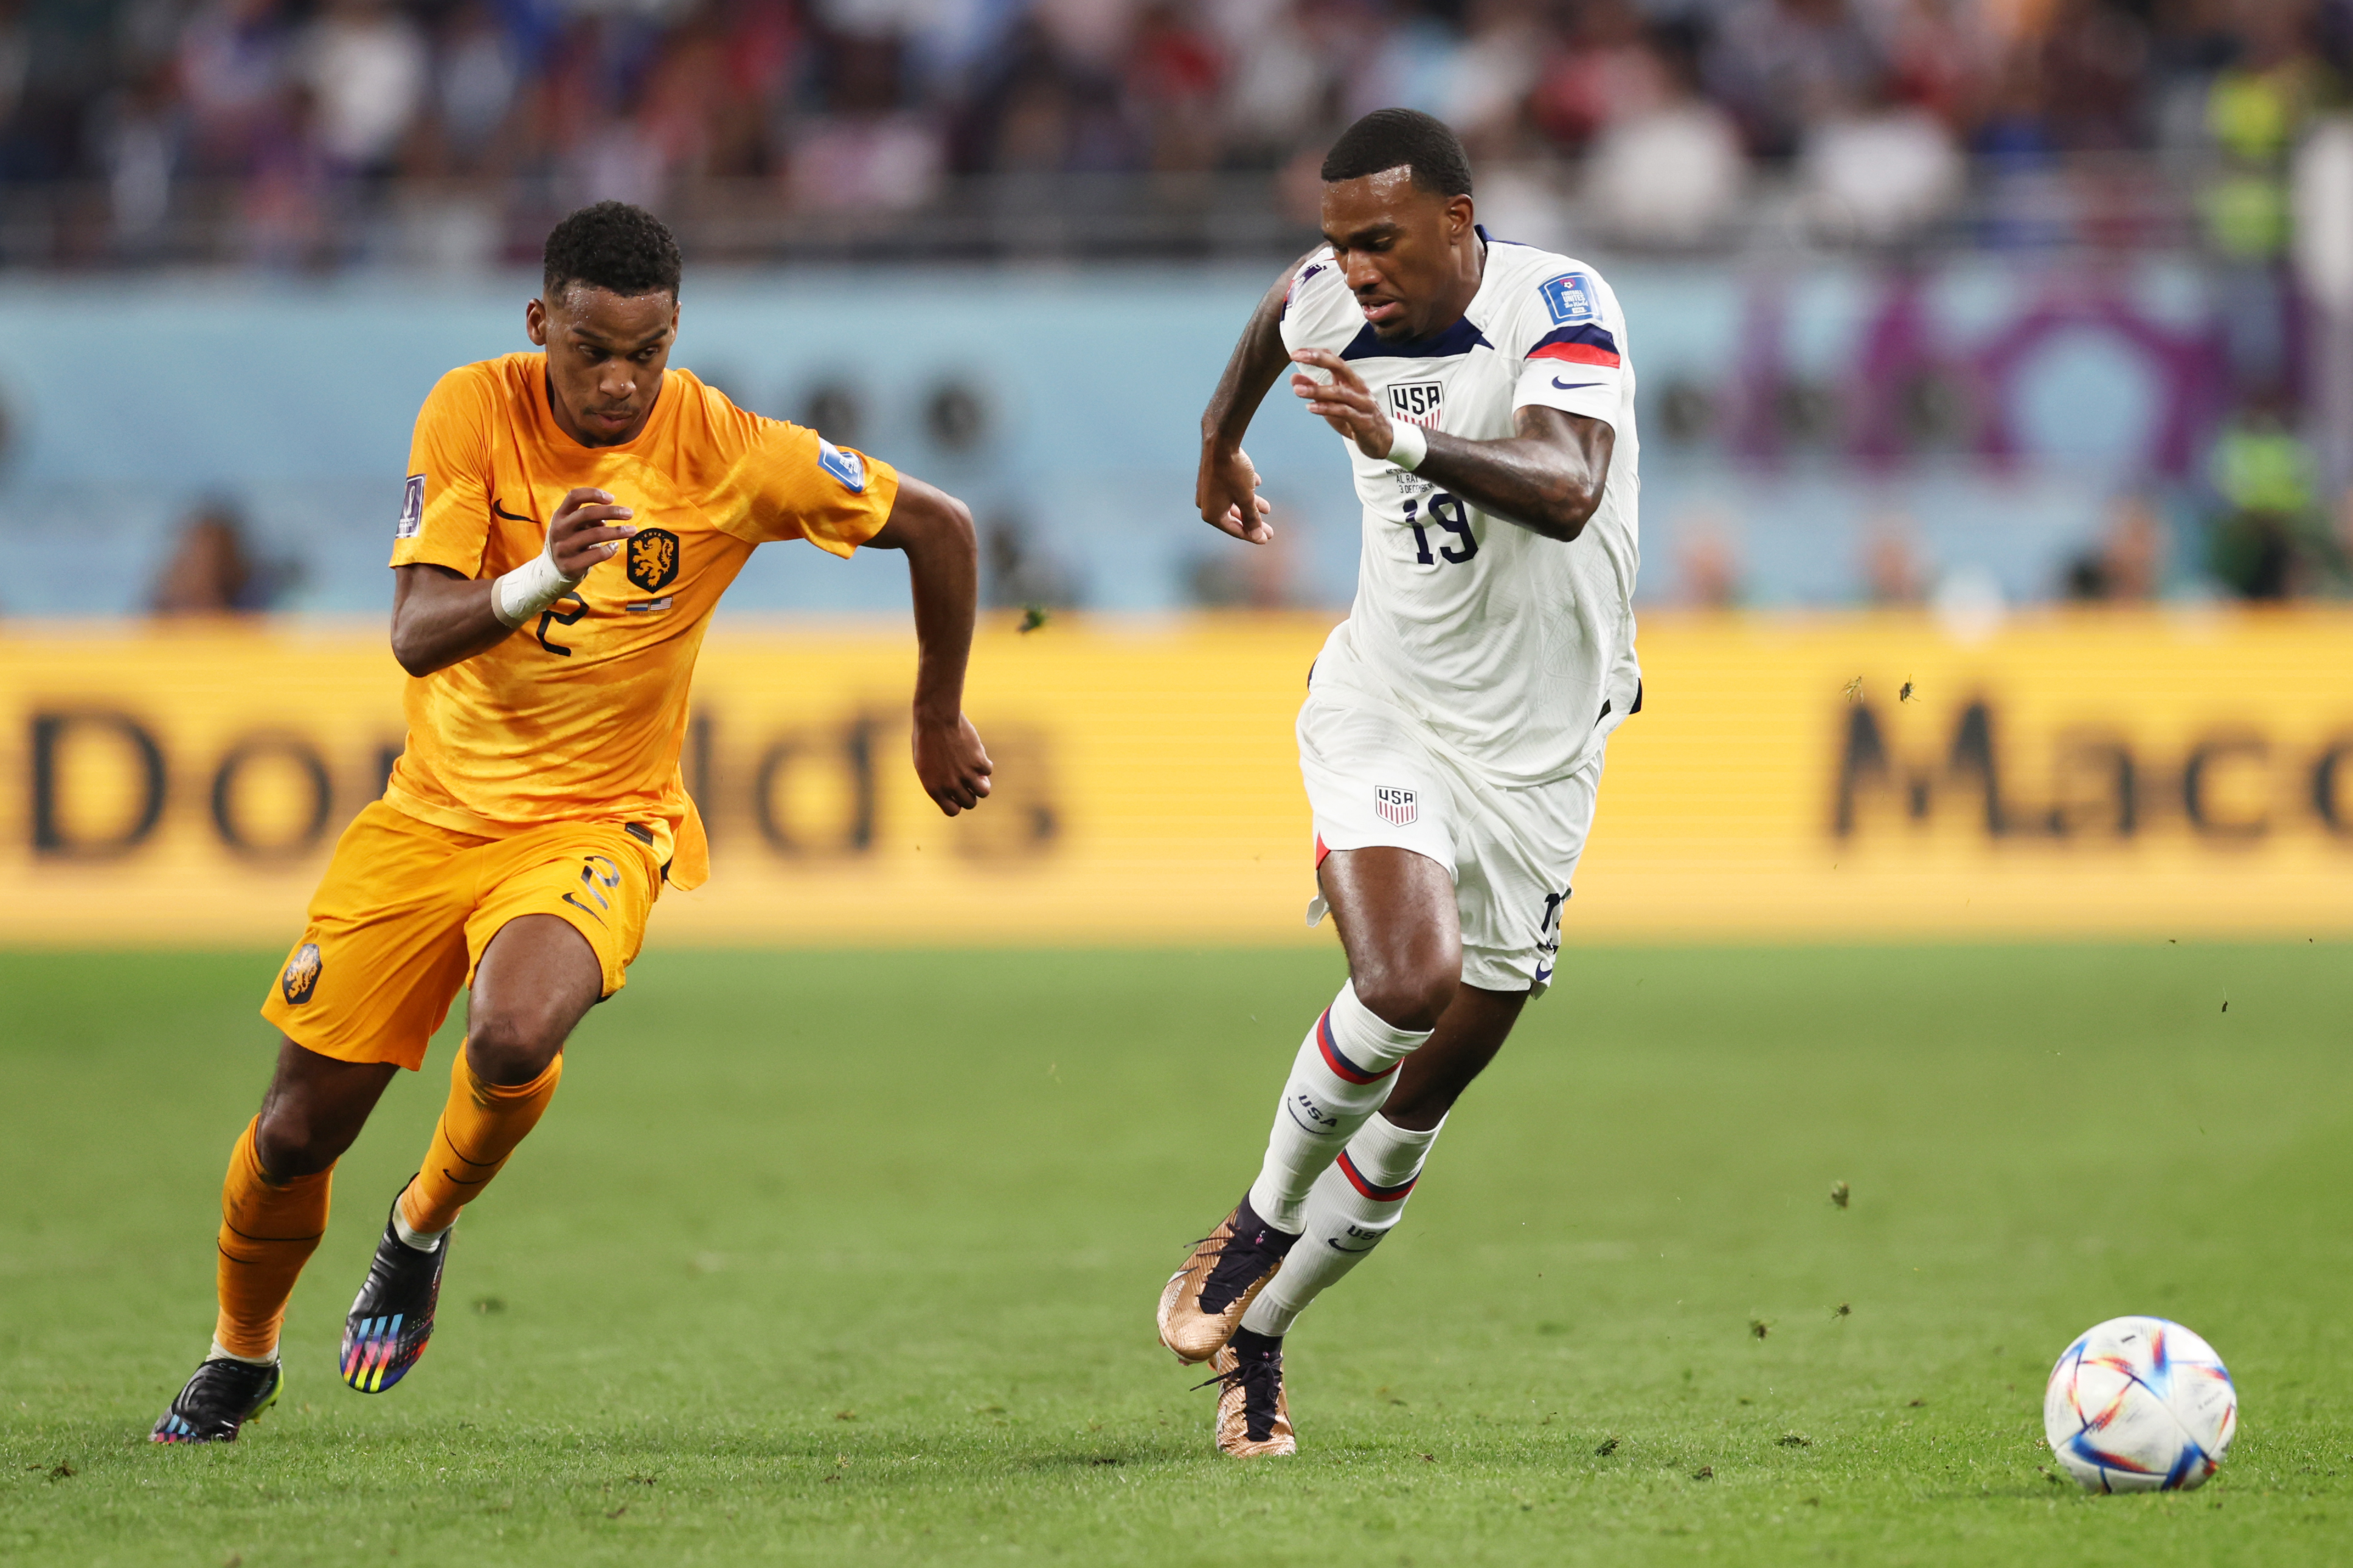 Jurrien Timber of Netherlands battles for possession with Haji Wright of United States during the FIFA World Cup Qatar 2022 Round of 16 match between Netherlands and USA at Khalifa International Stadium on December 03, 2022 in Doha, Qatar.